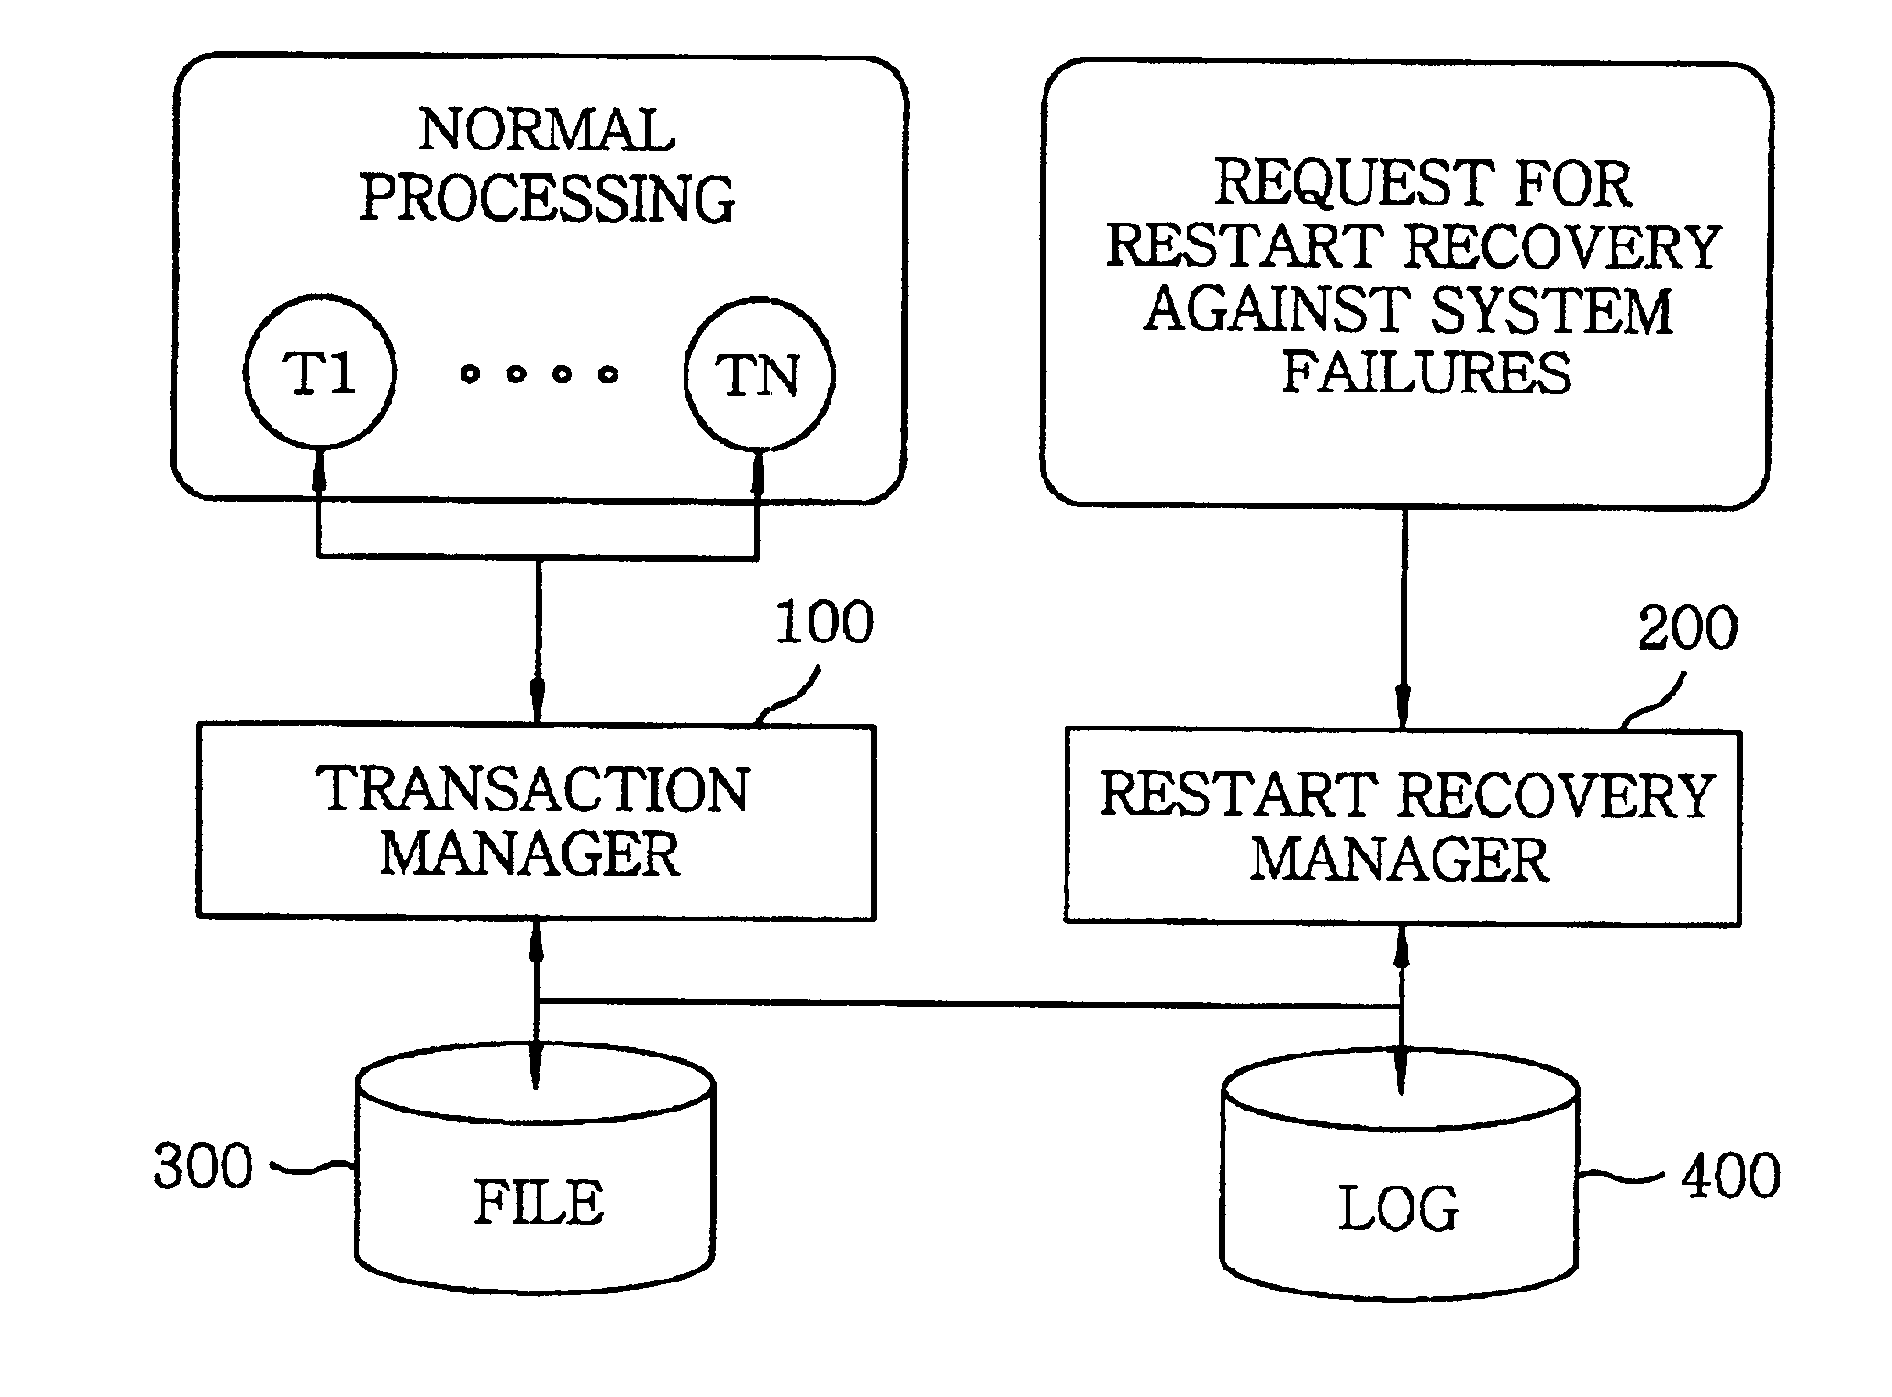 Method for file deletion and recovery against system failures in database management system